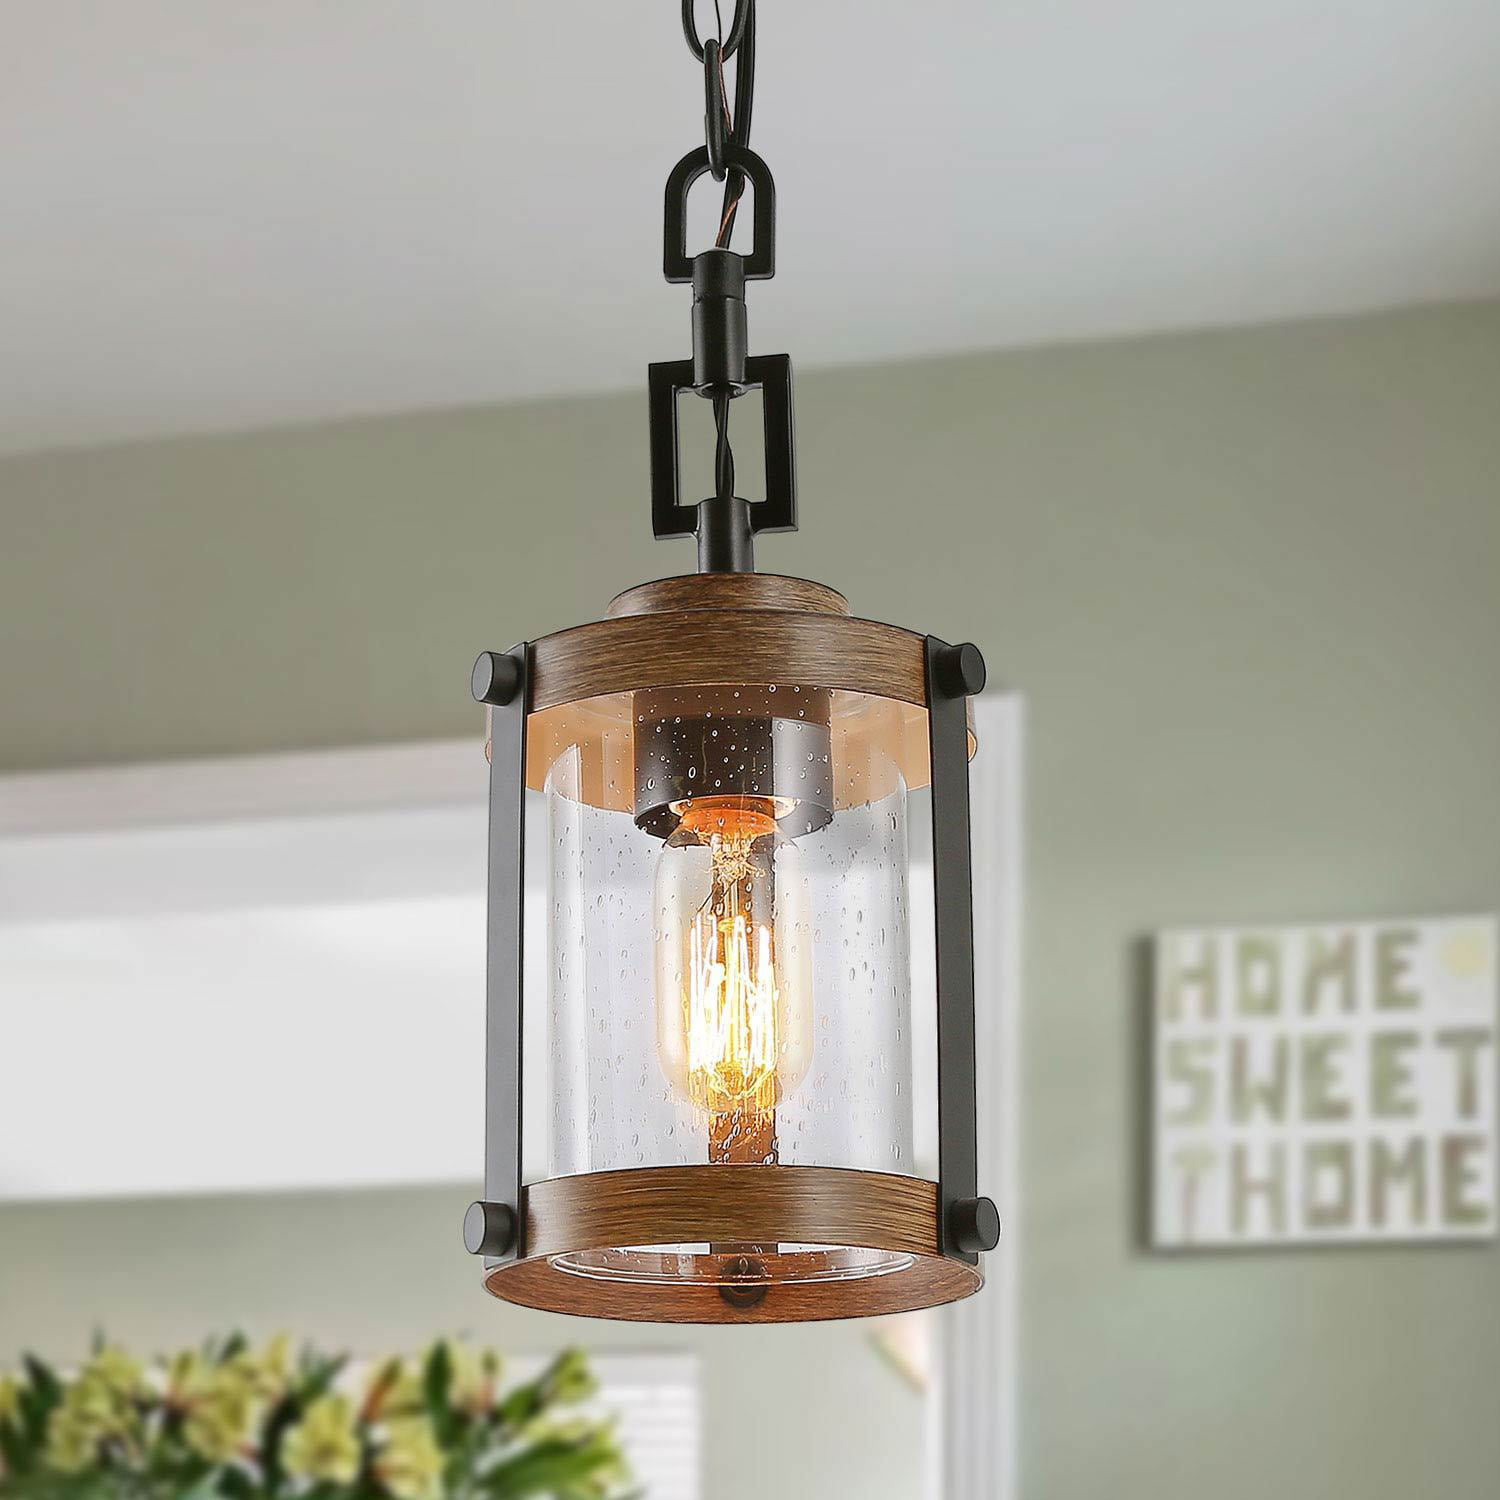 Industrial Pendant Light Kit Fixture Clear Seeded Glass Kitchen Island Vintage 